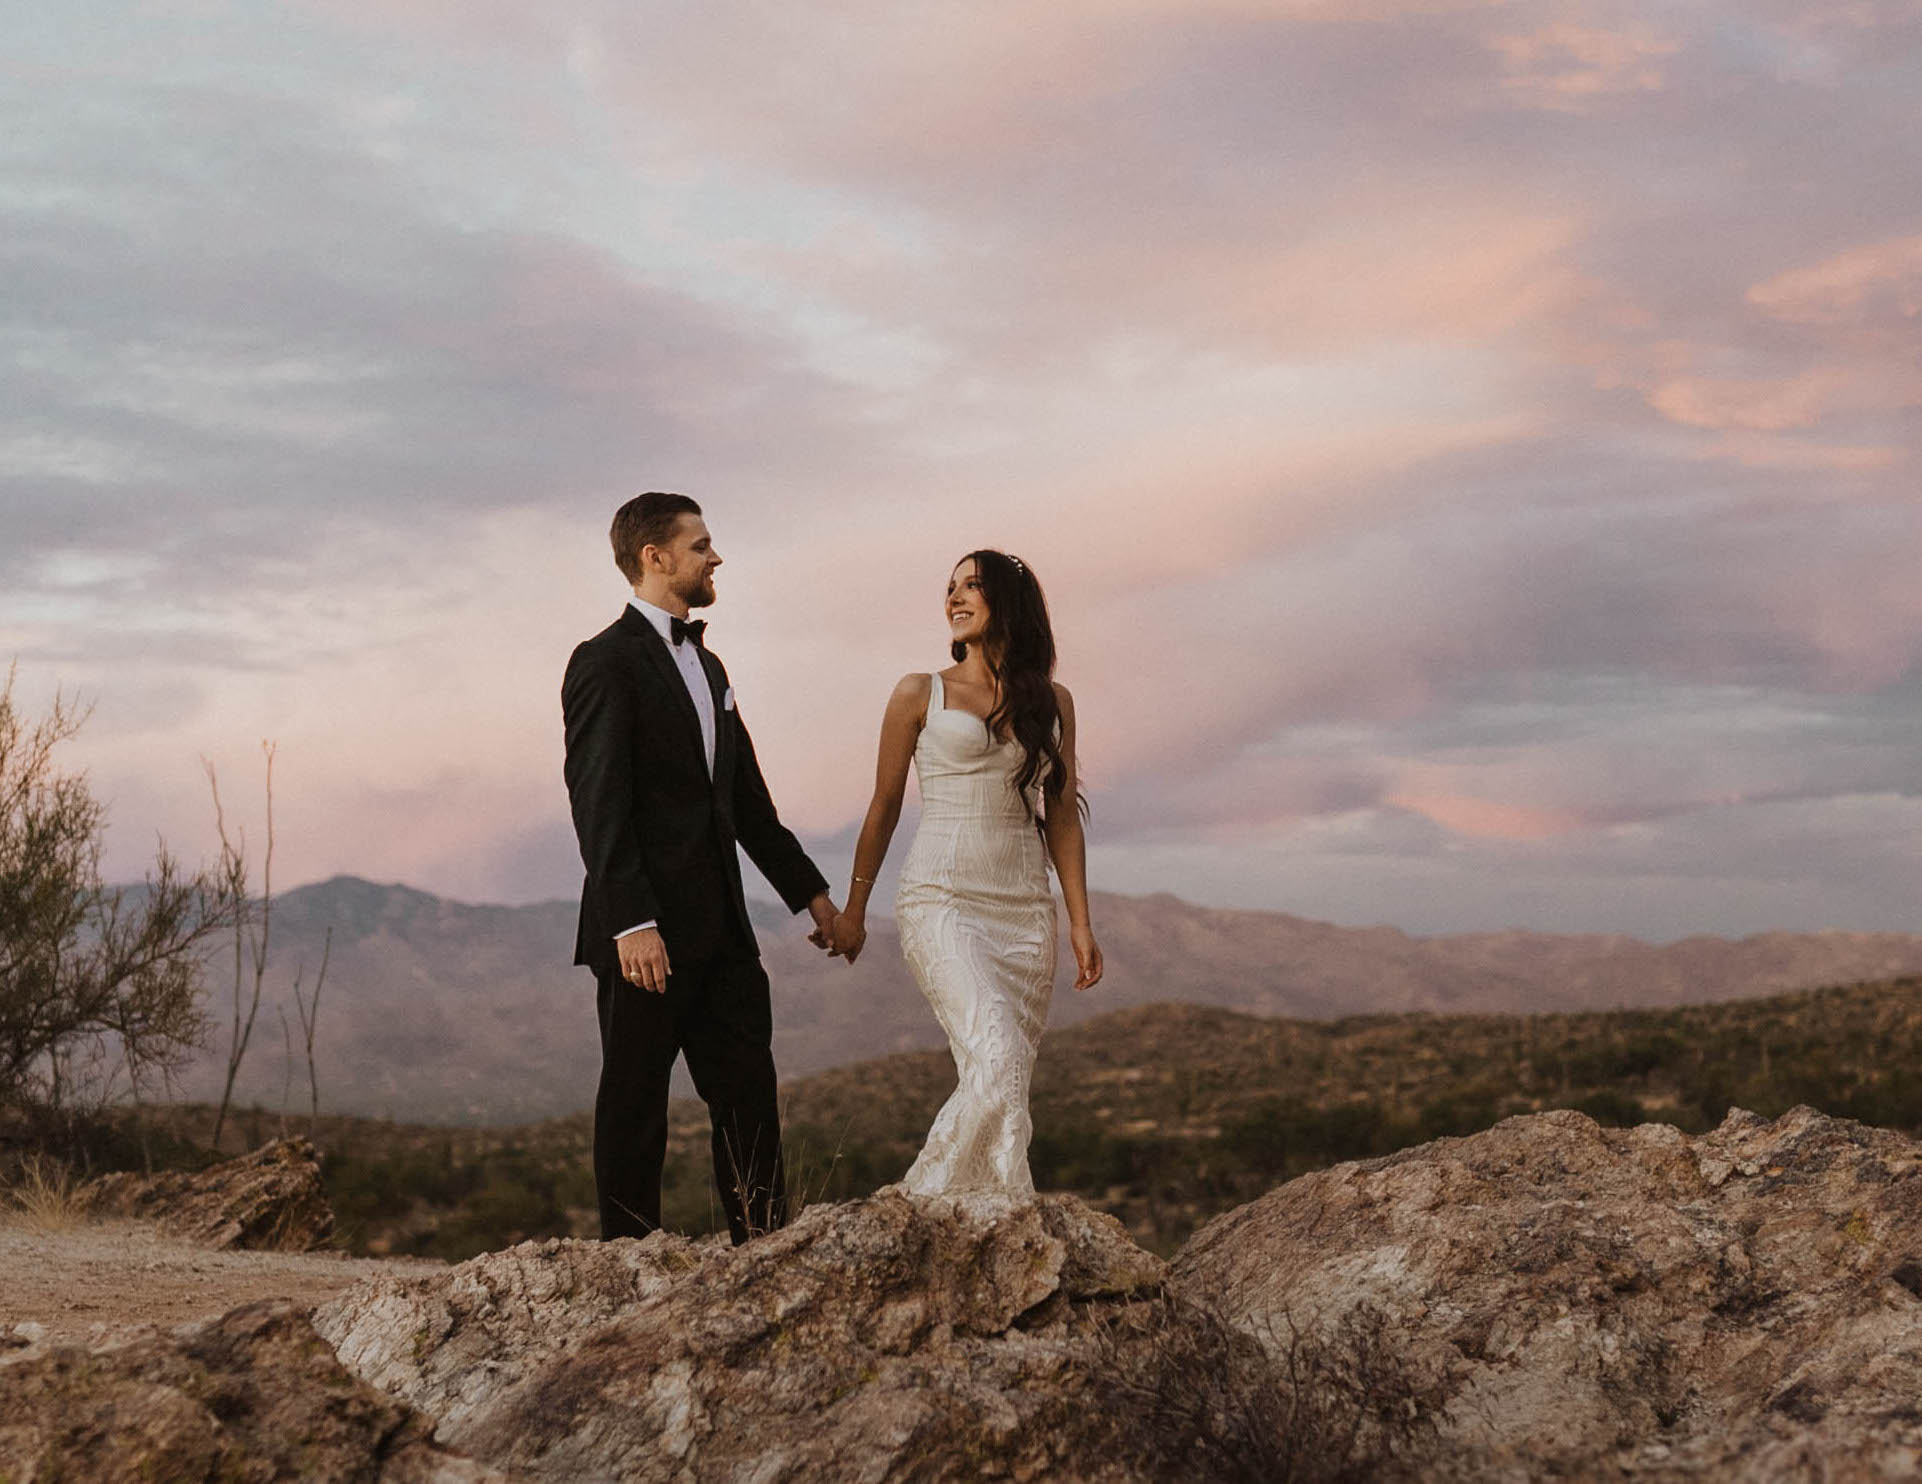 The bride and groom hold hands outside in Arizona with a sunset behind them.